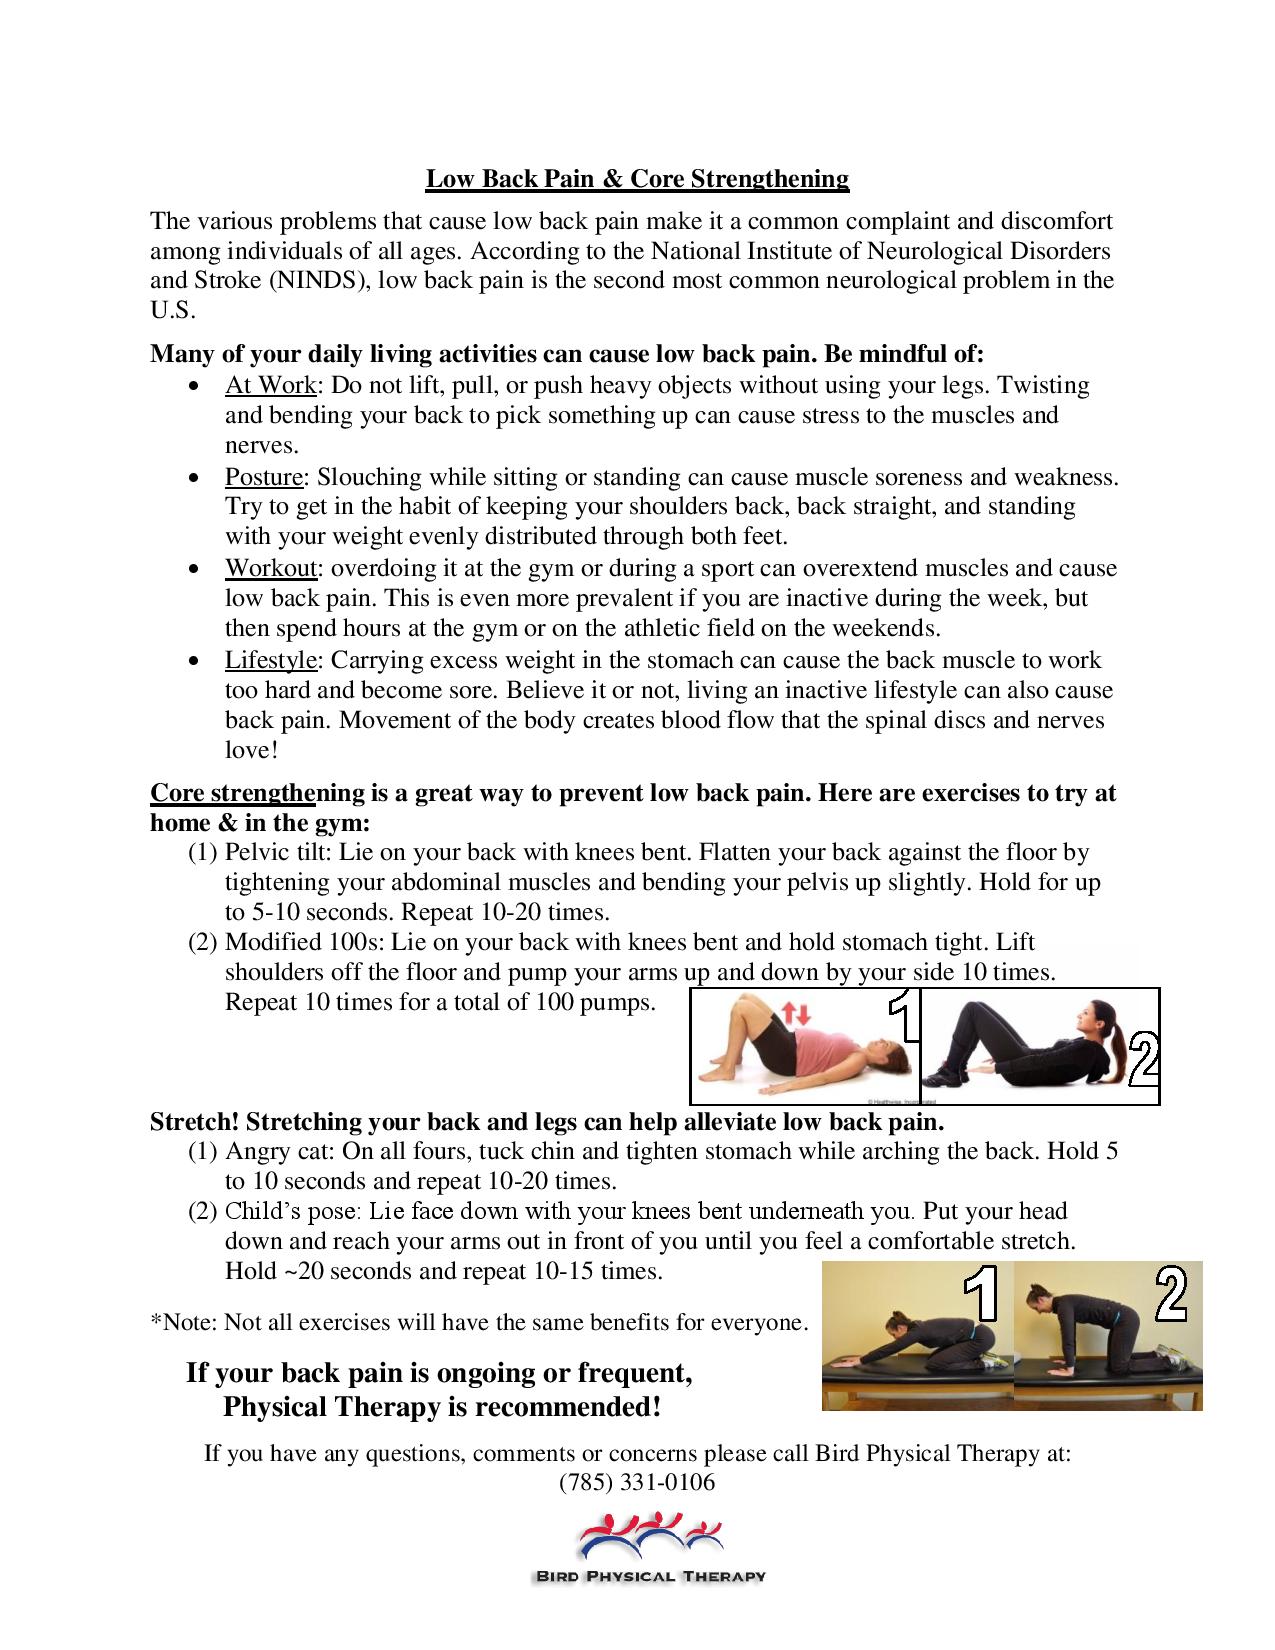 Low Back Pain & Core Strengthening - Bird Physical Therapy